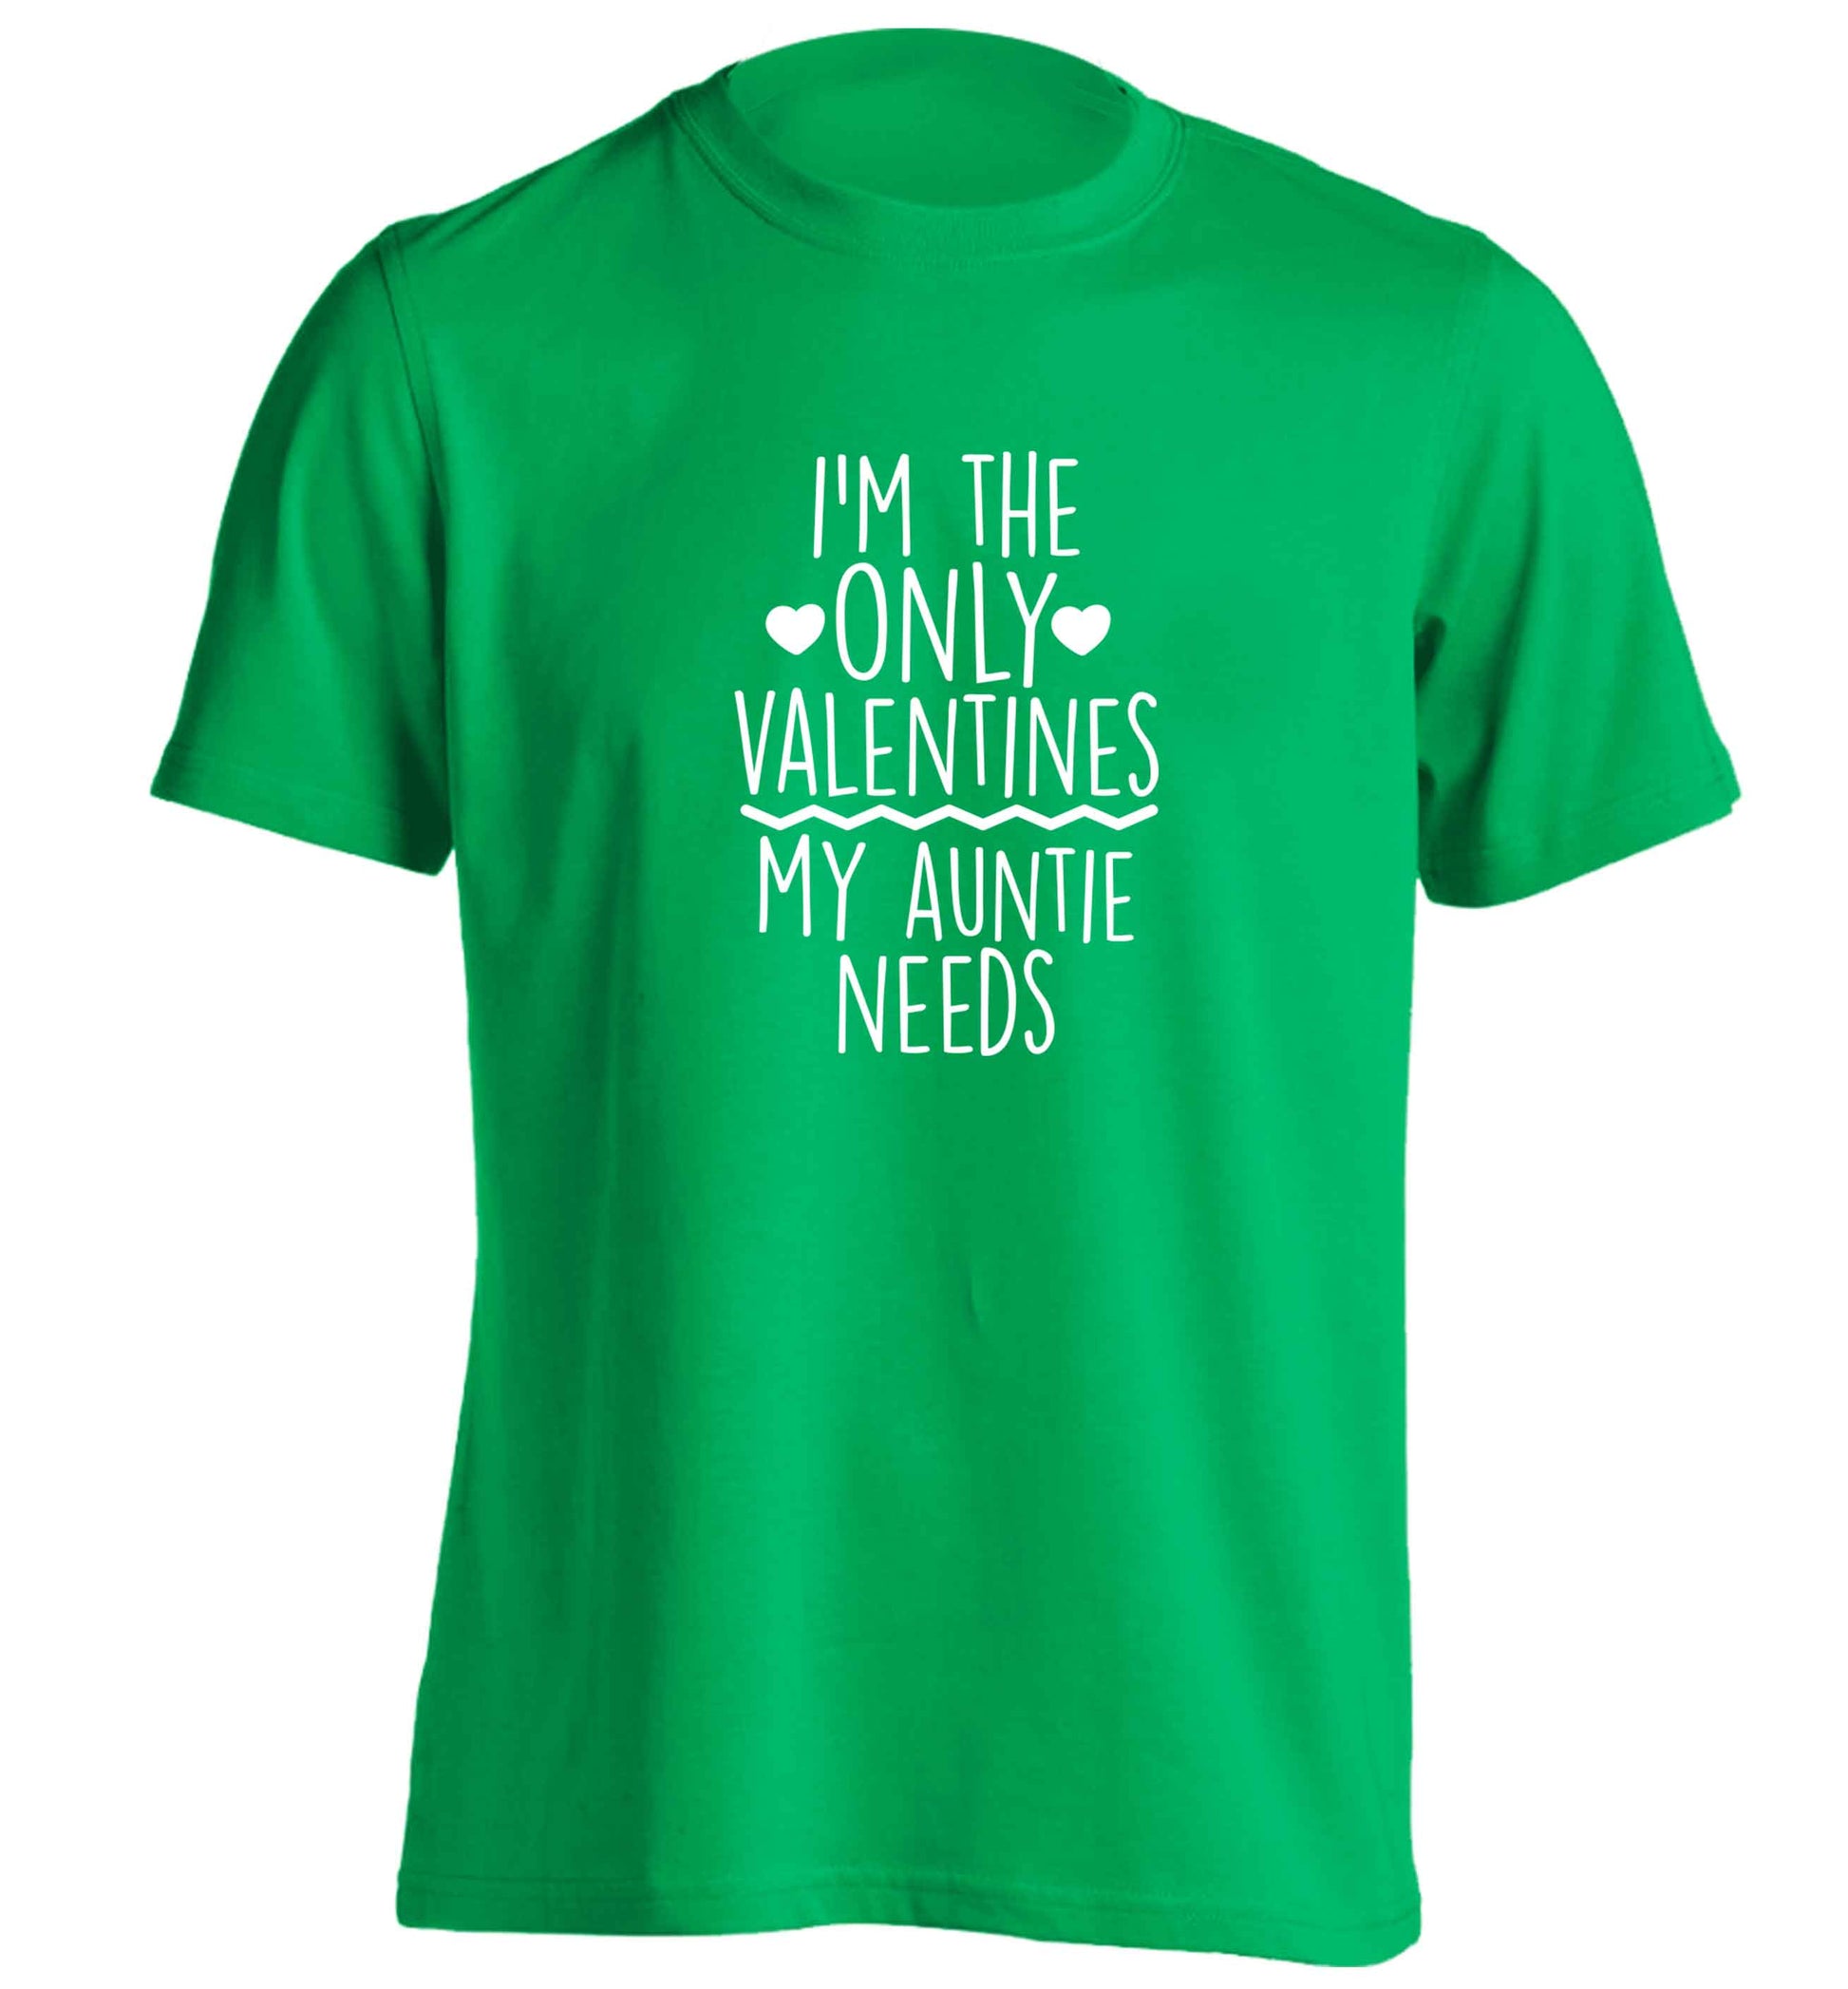 I'm the only valentines my auntie needs adults unisex green Tshirt 2XL